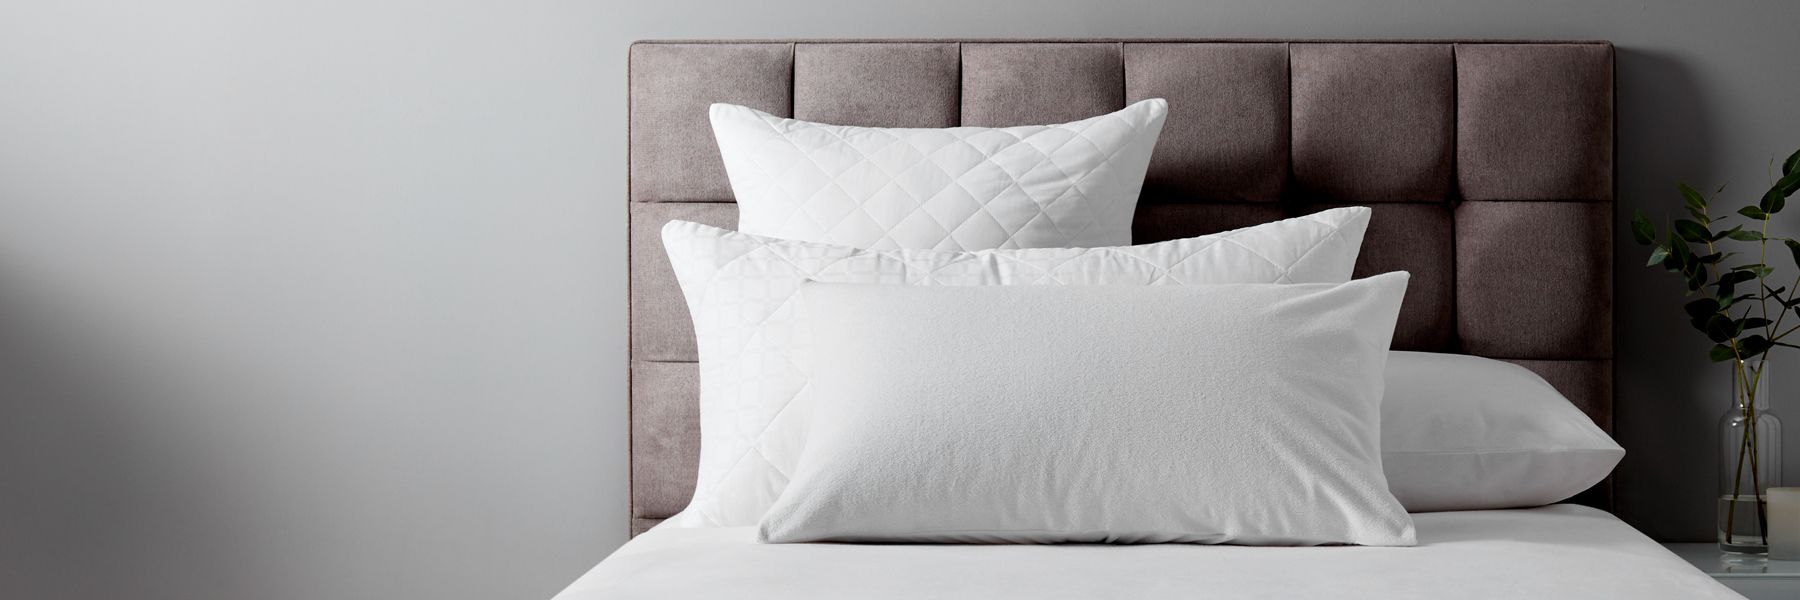 How To Clean Your Memory Foam Pillow